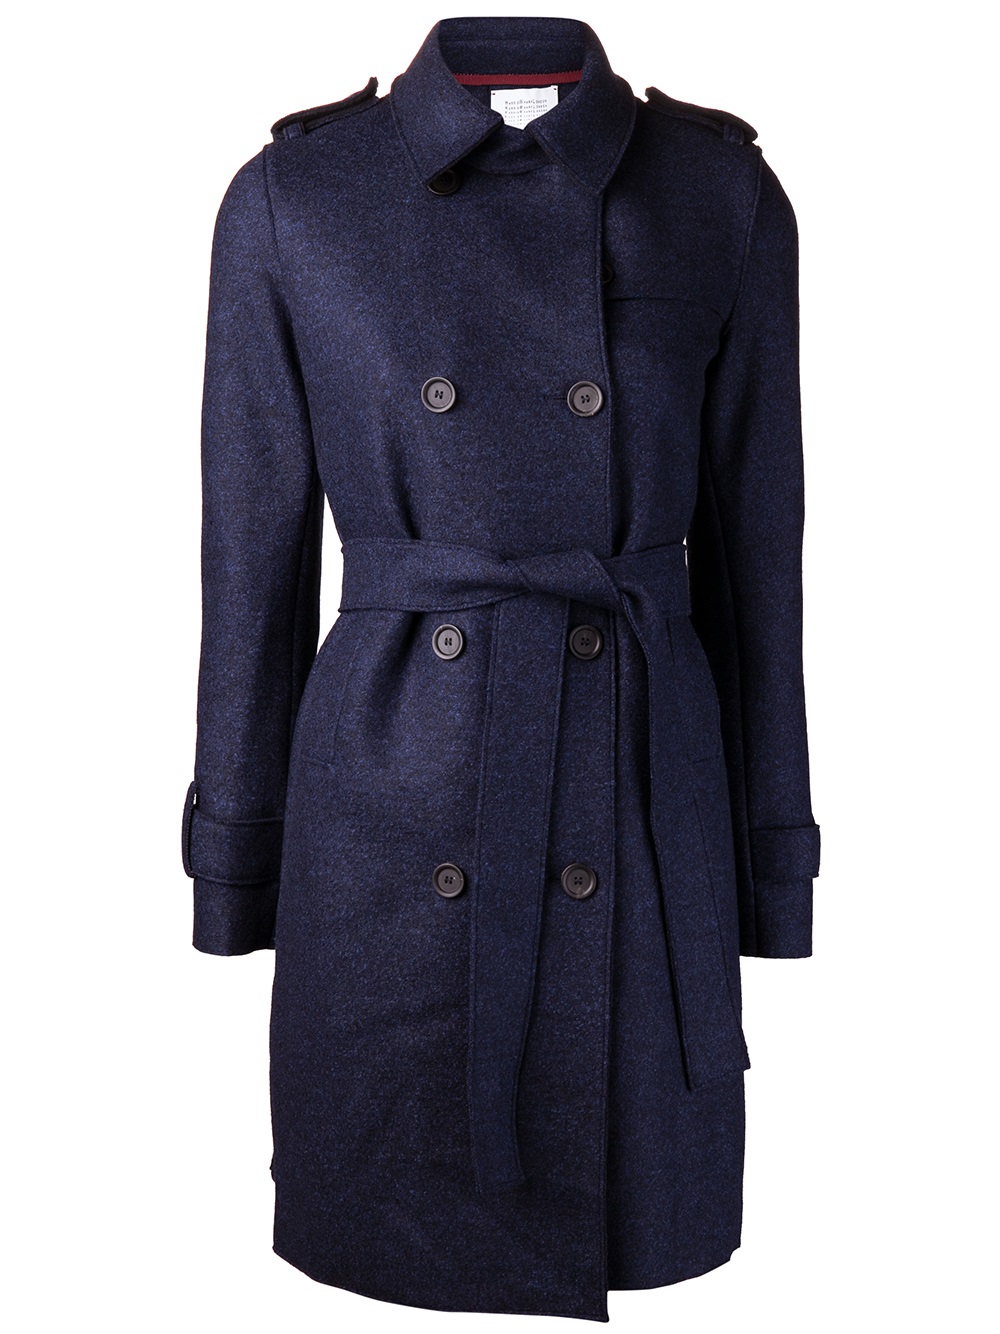 Lyst - Harris Wharf London Belted Trench Coat in Blue